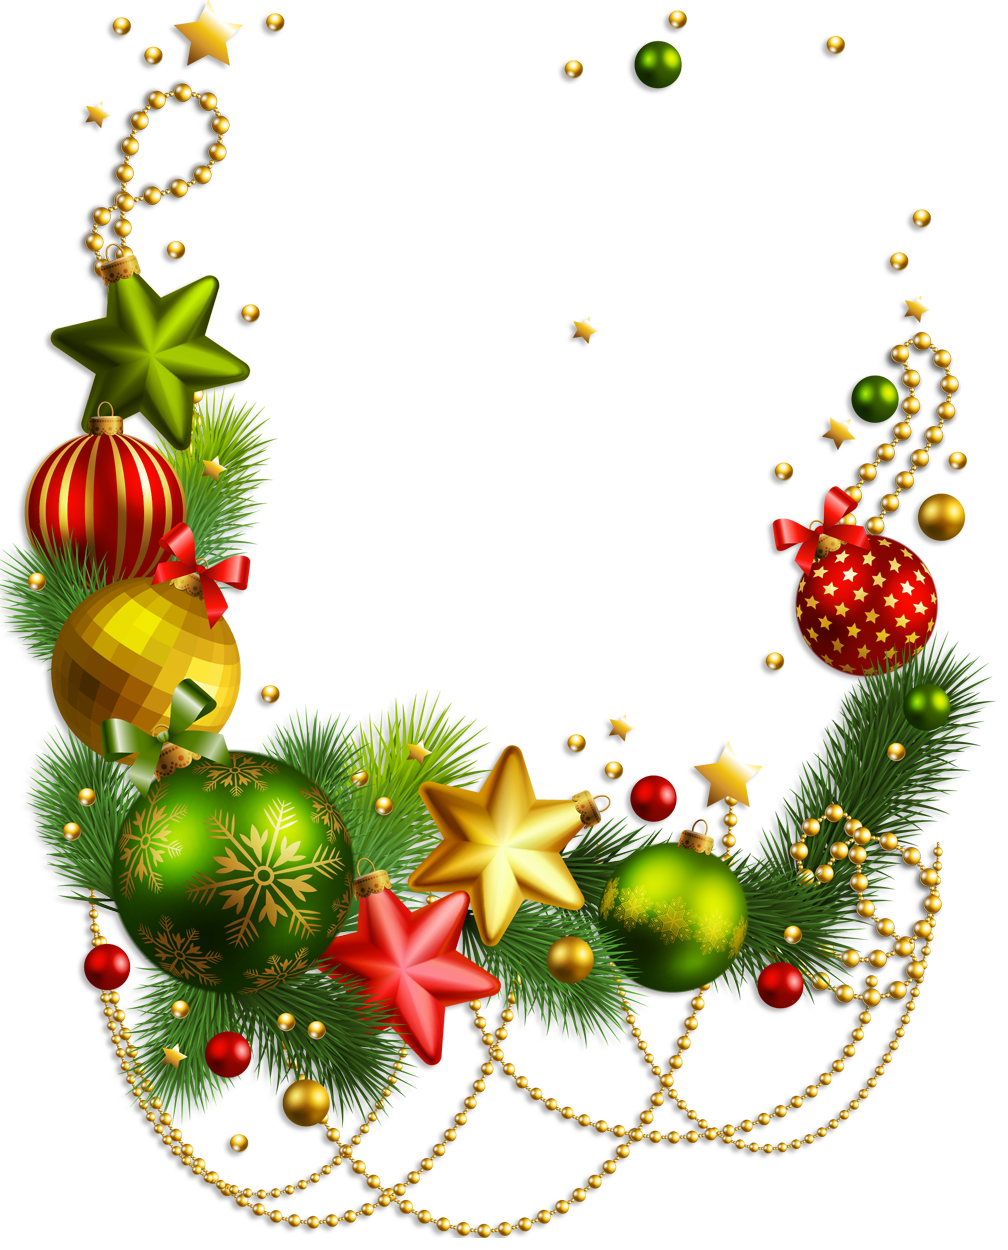 Christmas Ornaments Images